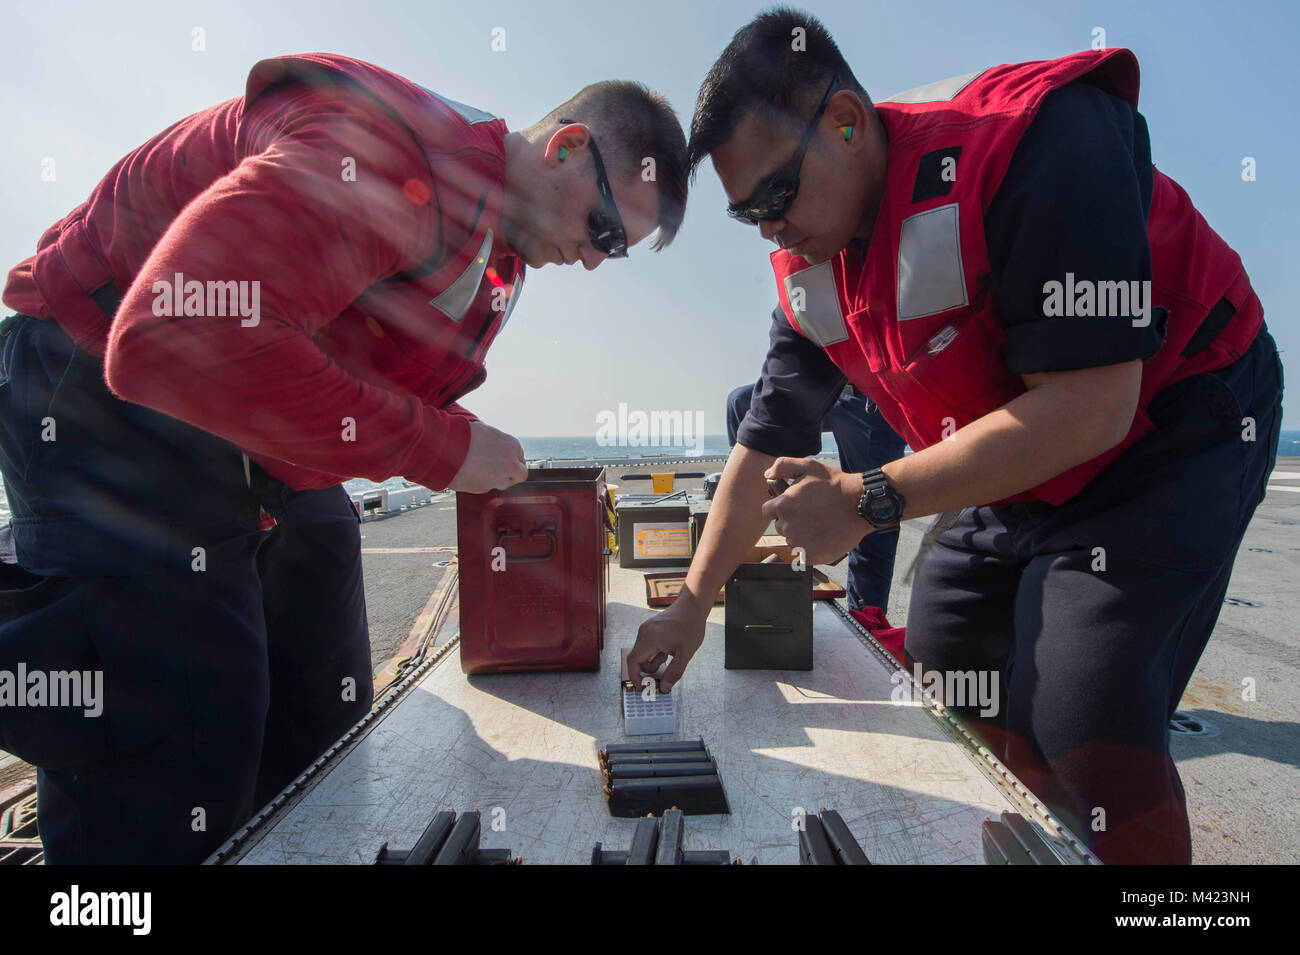 180208-N-NB544-144 SOUTH CHINA SEA (Feb. 8, 2018) Gunner's Mate Seaman Michael Norris, left, from Oakdale, Calif., and Gunner's Mate 2nd Class Tristan Jesusa, from Baras, Philippines, load 9 mm pistol magazines during a gun shoot aboard the amphibious assault ship USS Bonhomme Richard (LHD 6). Bonhomme Richard is operating in the Indo-Asia-Pacific region as part of a regularly scheduled patrol and provides a rapid-response capability in the event of a regional contingency or natural disaster. (U.S. Navy photo by Mass Communication Specialist 2nd Class Kyle Carlstrom/Released) Stock Photo